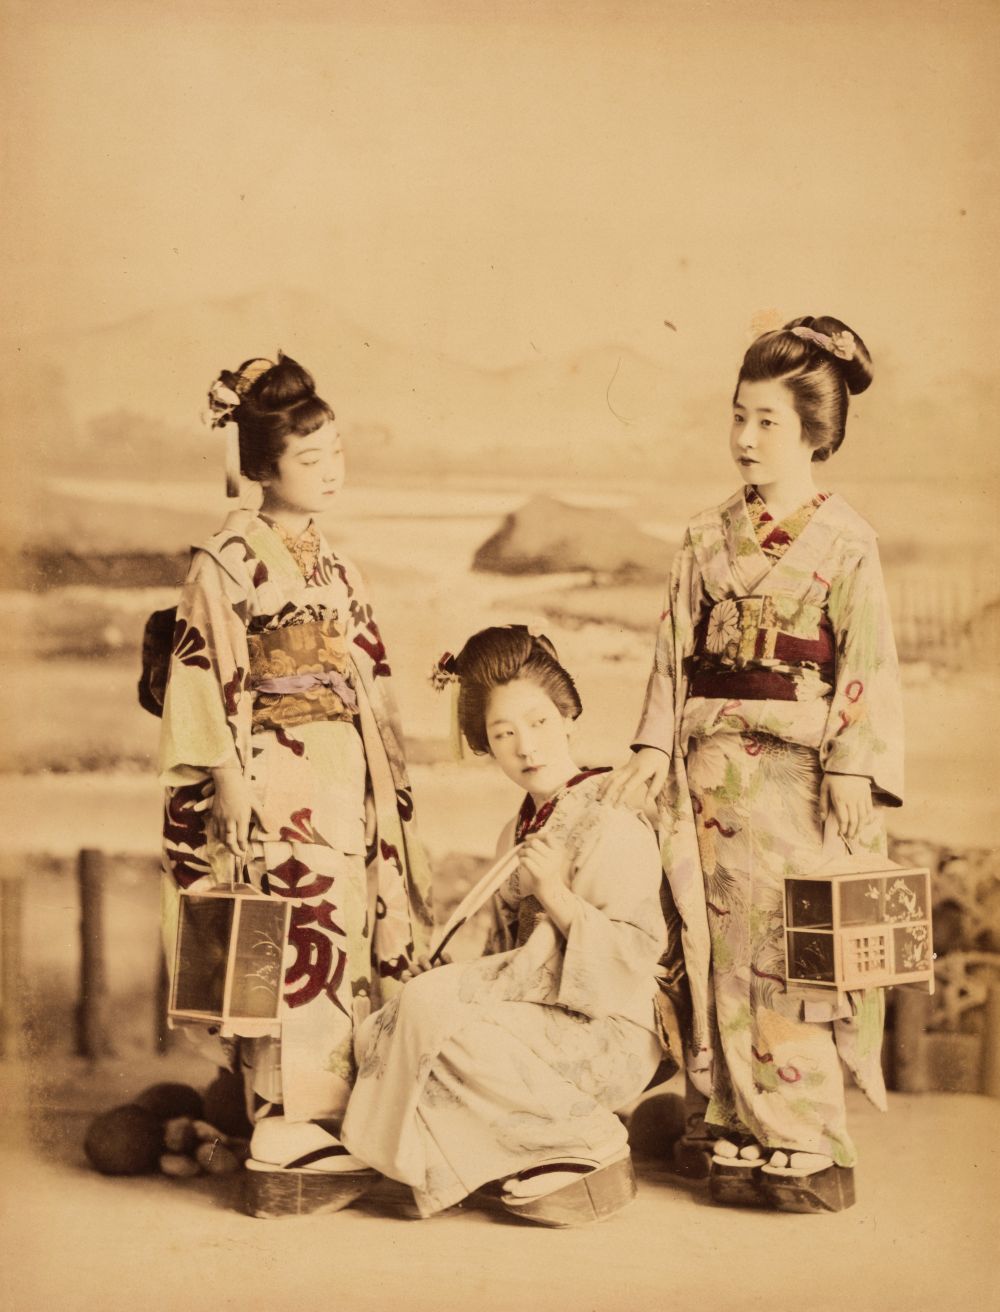 Japan. A group of 3 Japanese girls in traditional dress, c. 1880